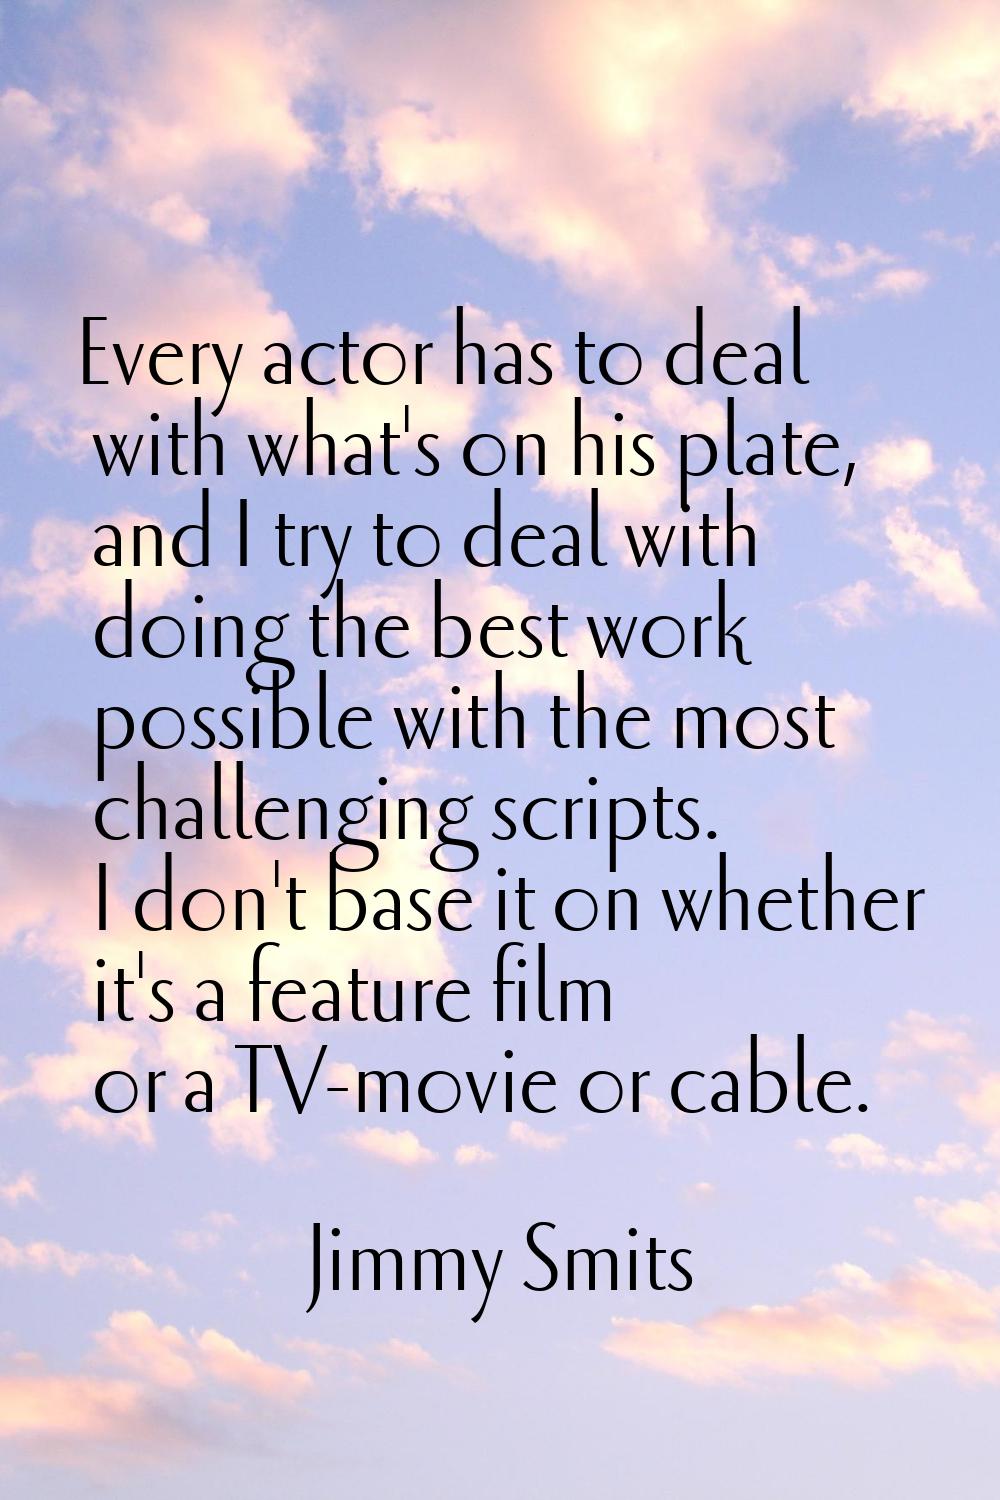 Every actor has to deal with what's on his plate, and I try to deal with doing the best work possib